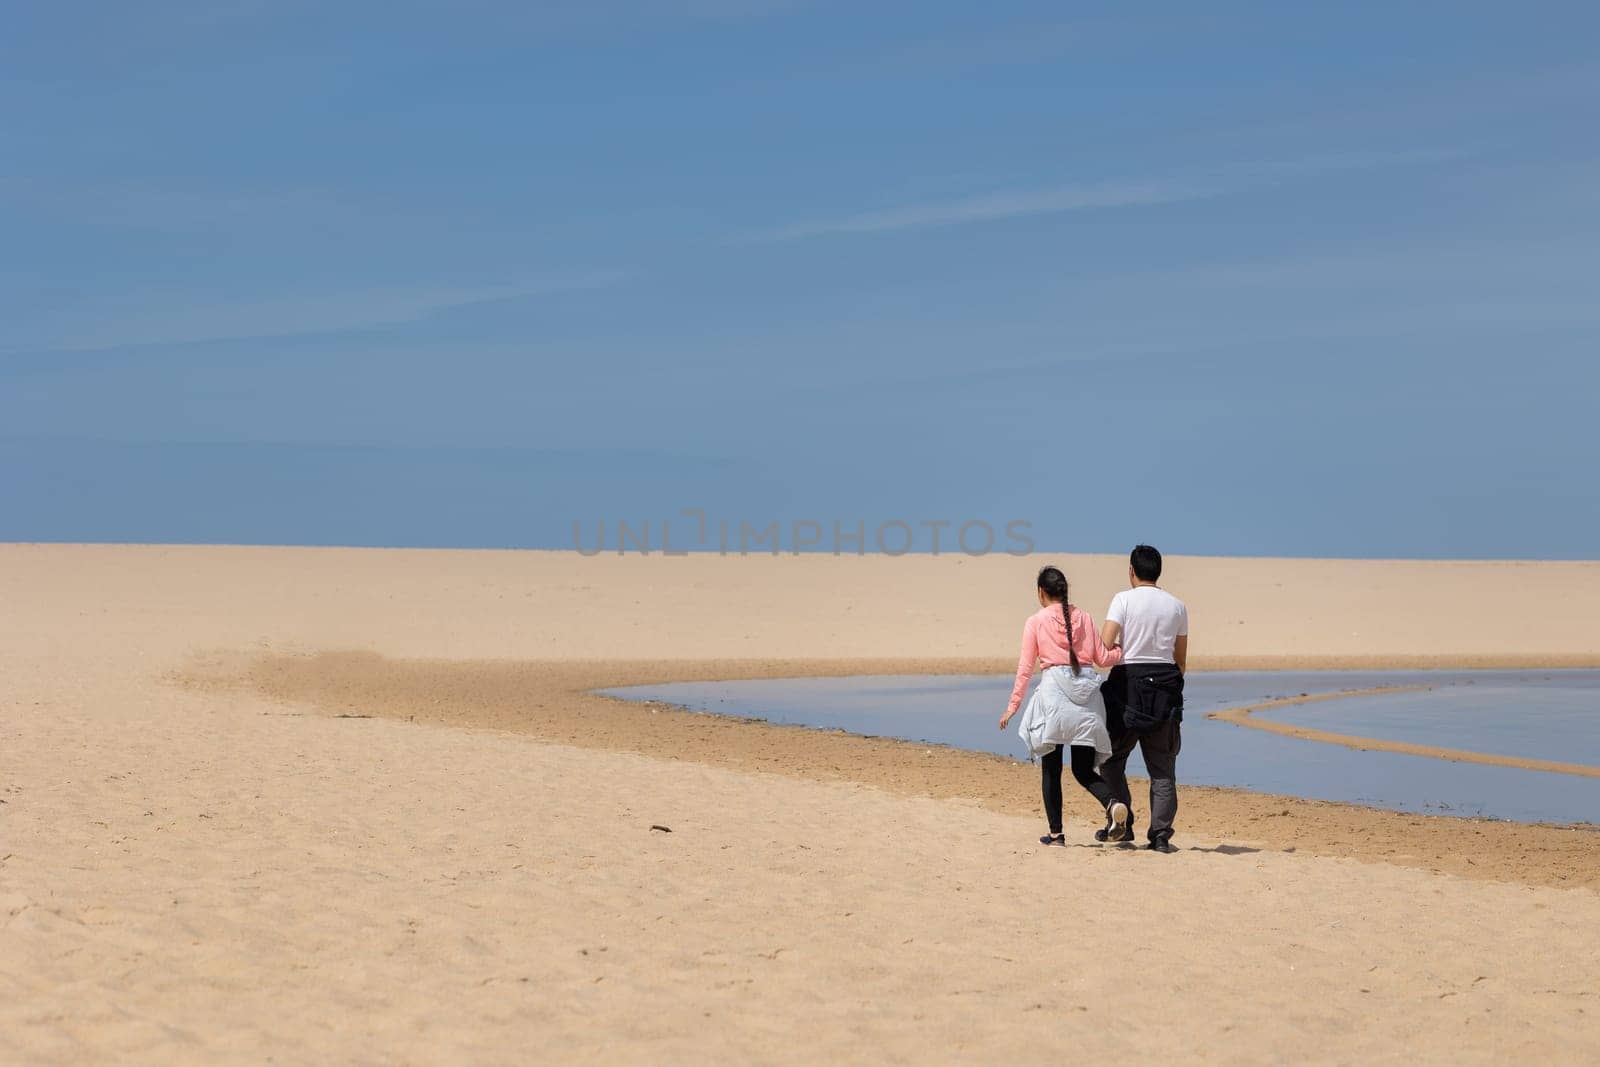 A couple walking on a beach with a clear blue sky above them. The beach is empty and the couple is the only ones there